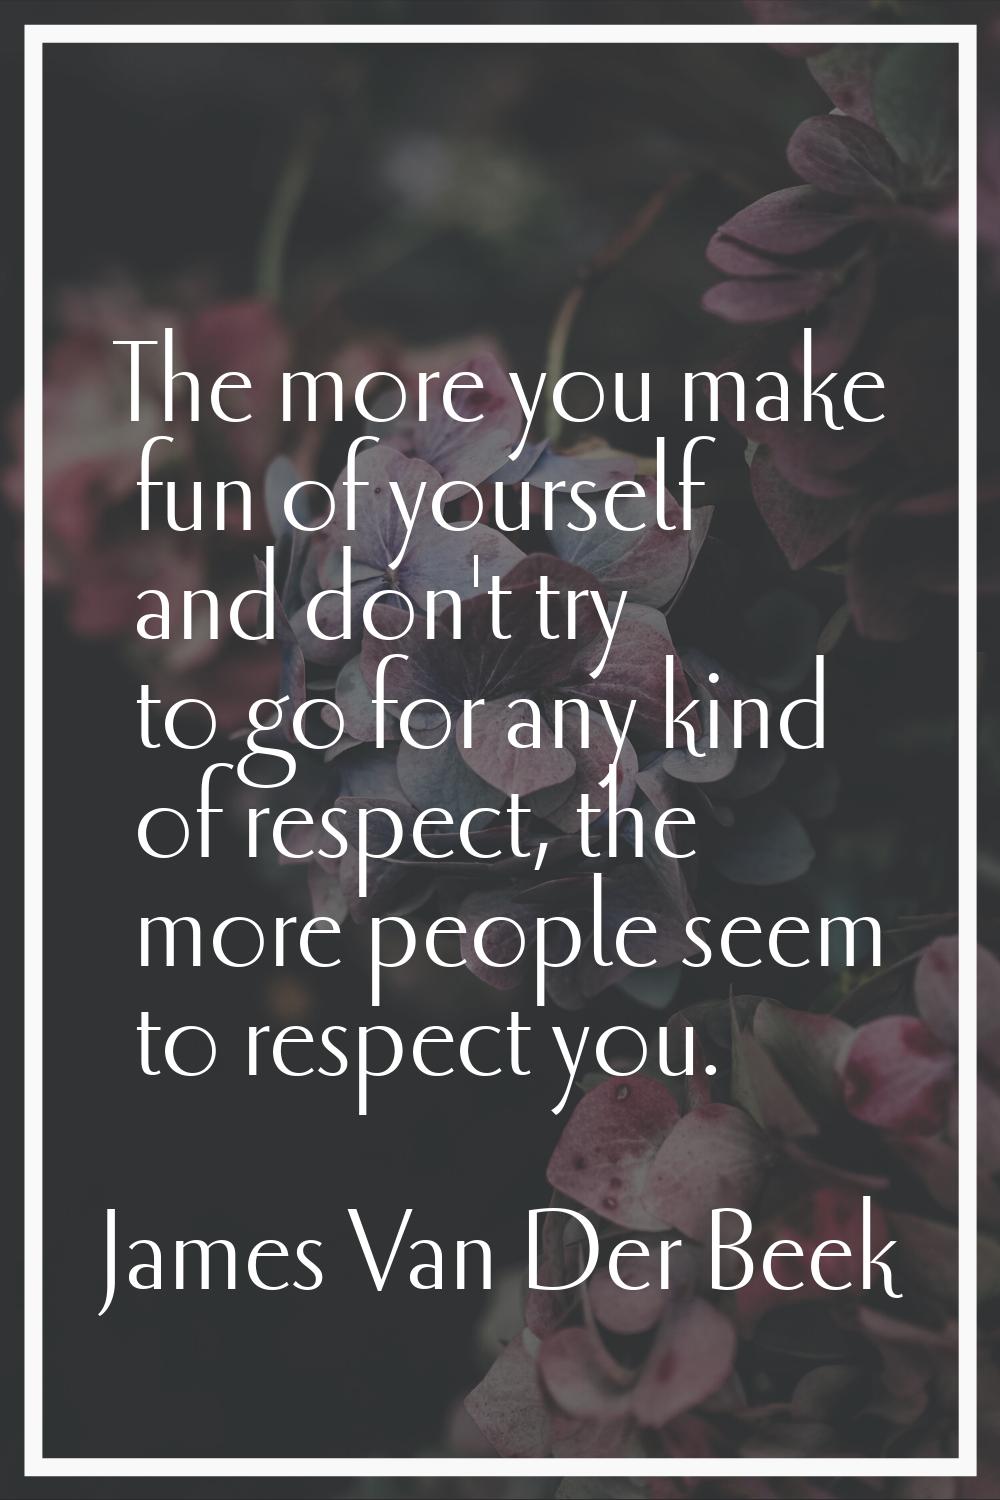 The more you make fun of yourself and don't try to go for any kind of respect, the more people seem